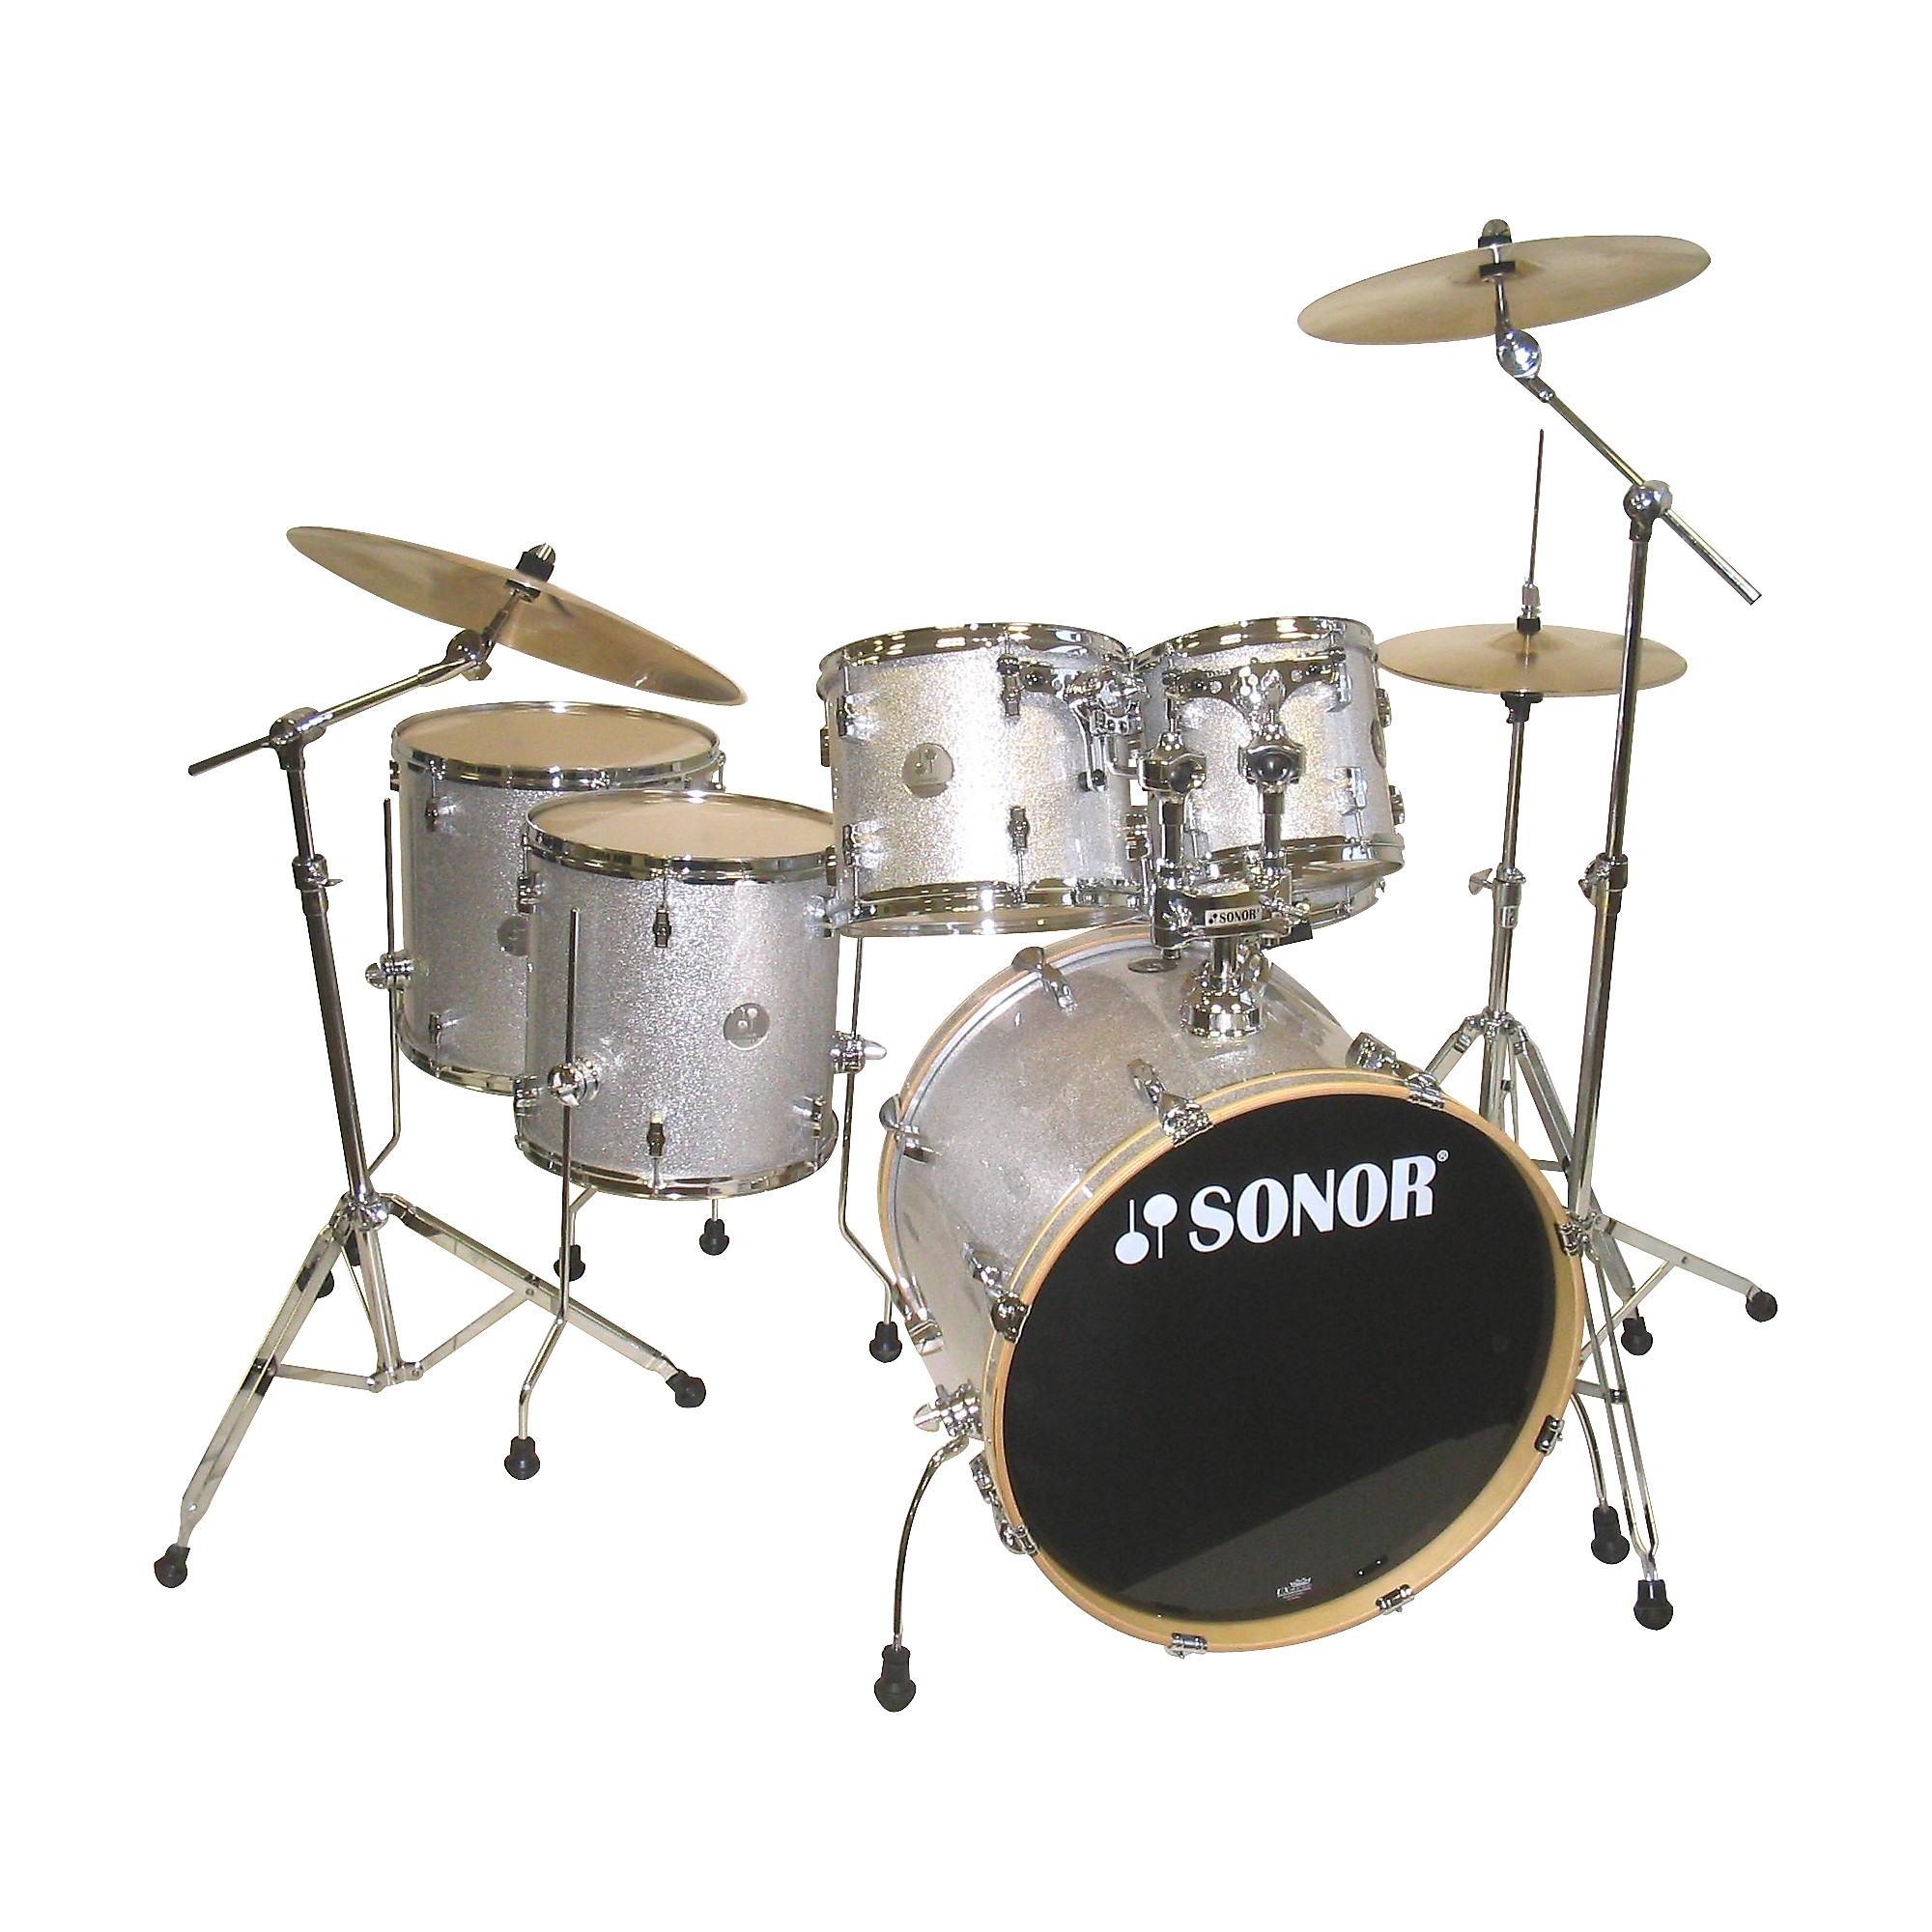 SONOR Special edition 6 piece drumset 12 x  in. | Guitar Center